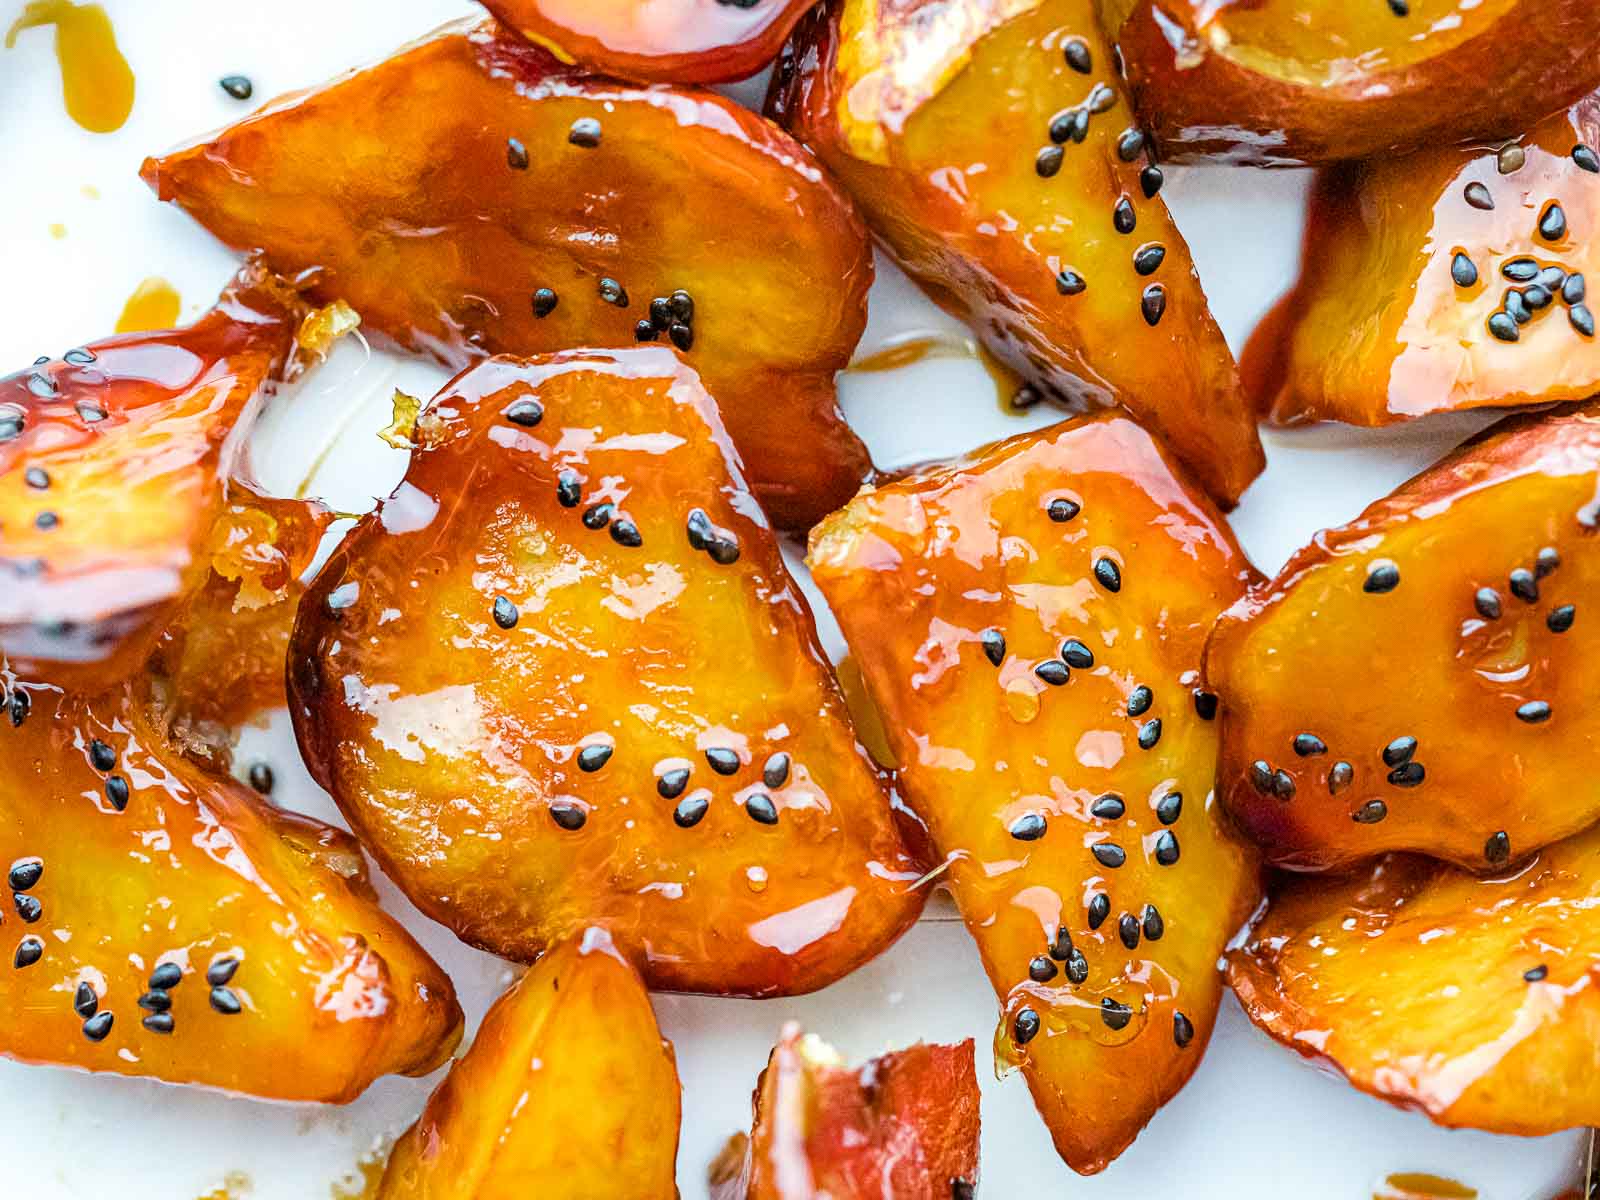 close up of Japanese candied sweet potatoes with caramelized coating and black sesame seeds